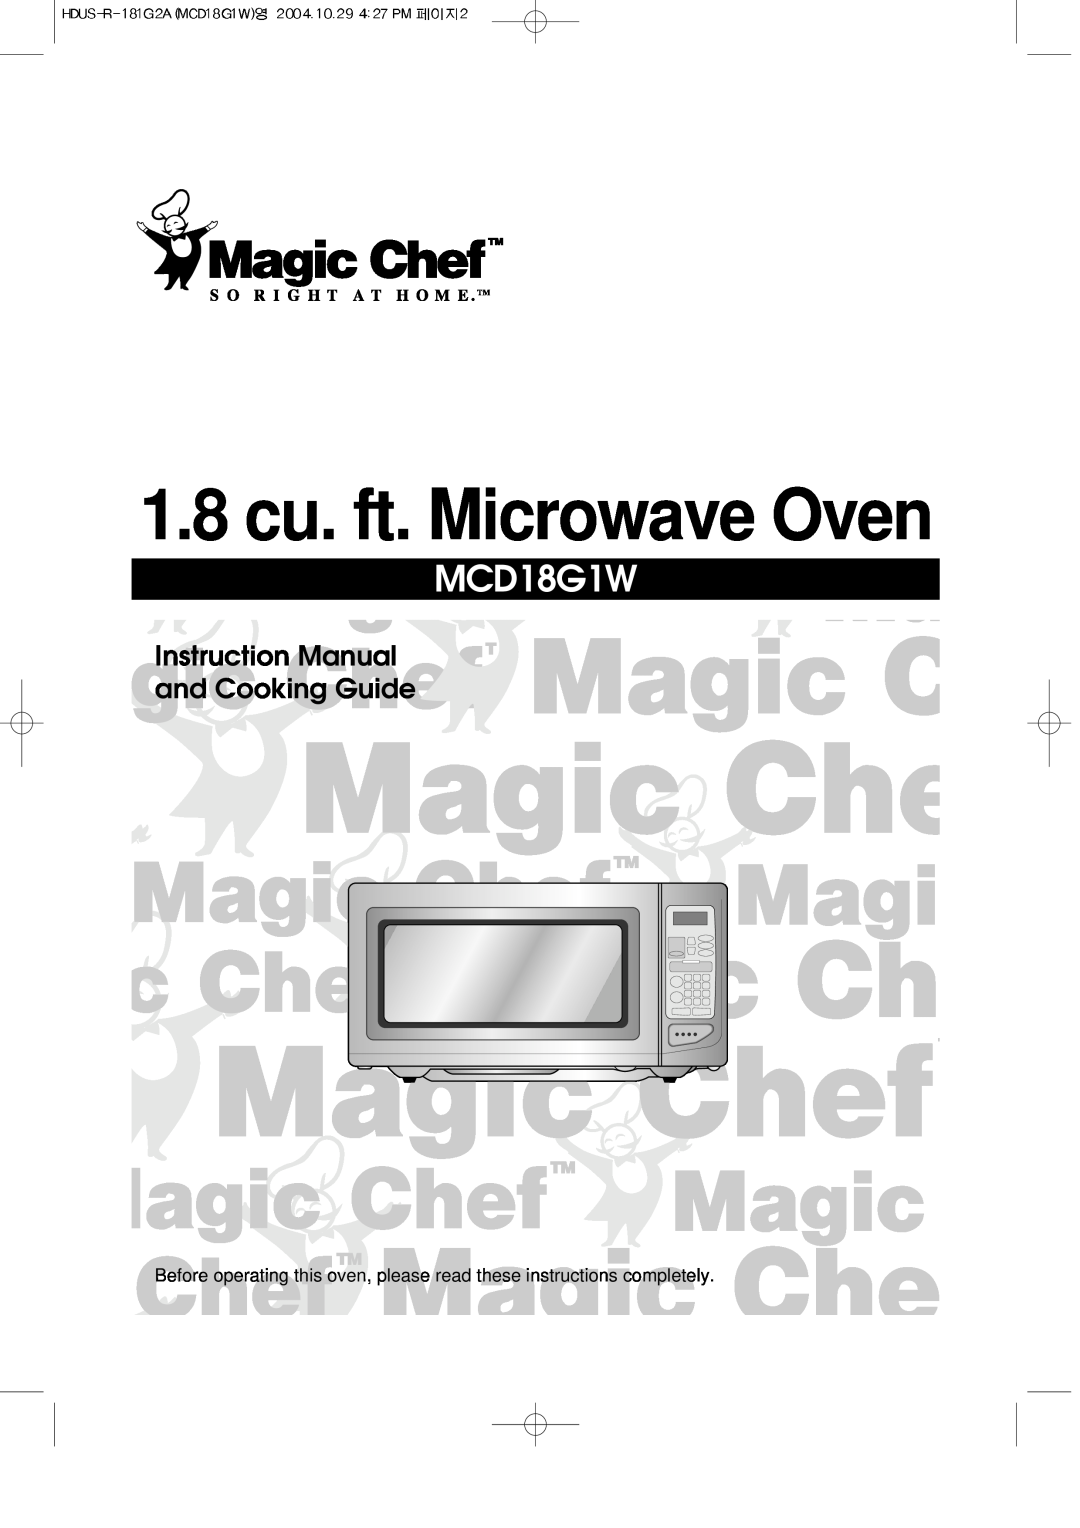 Magic Chef MCD18G1W instruction manual 1.8 cu. ft. Microwave Oven 